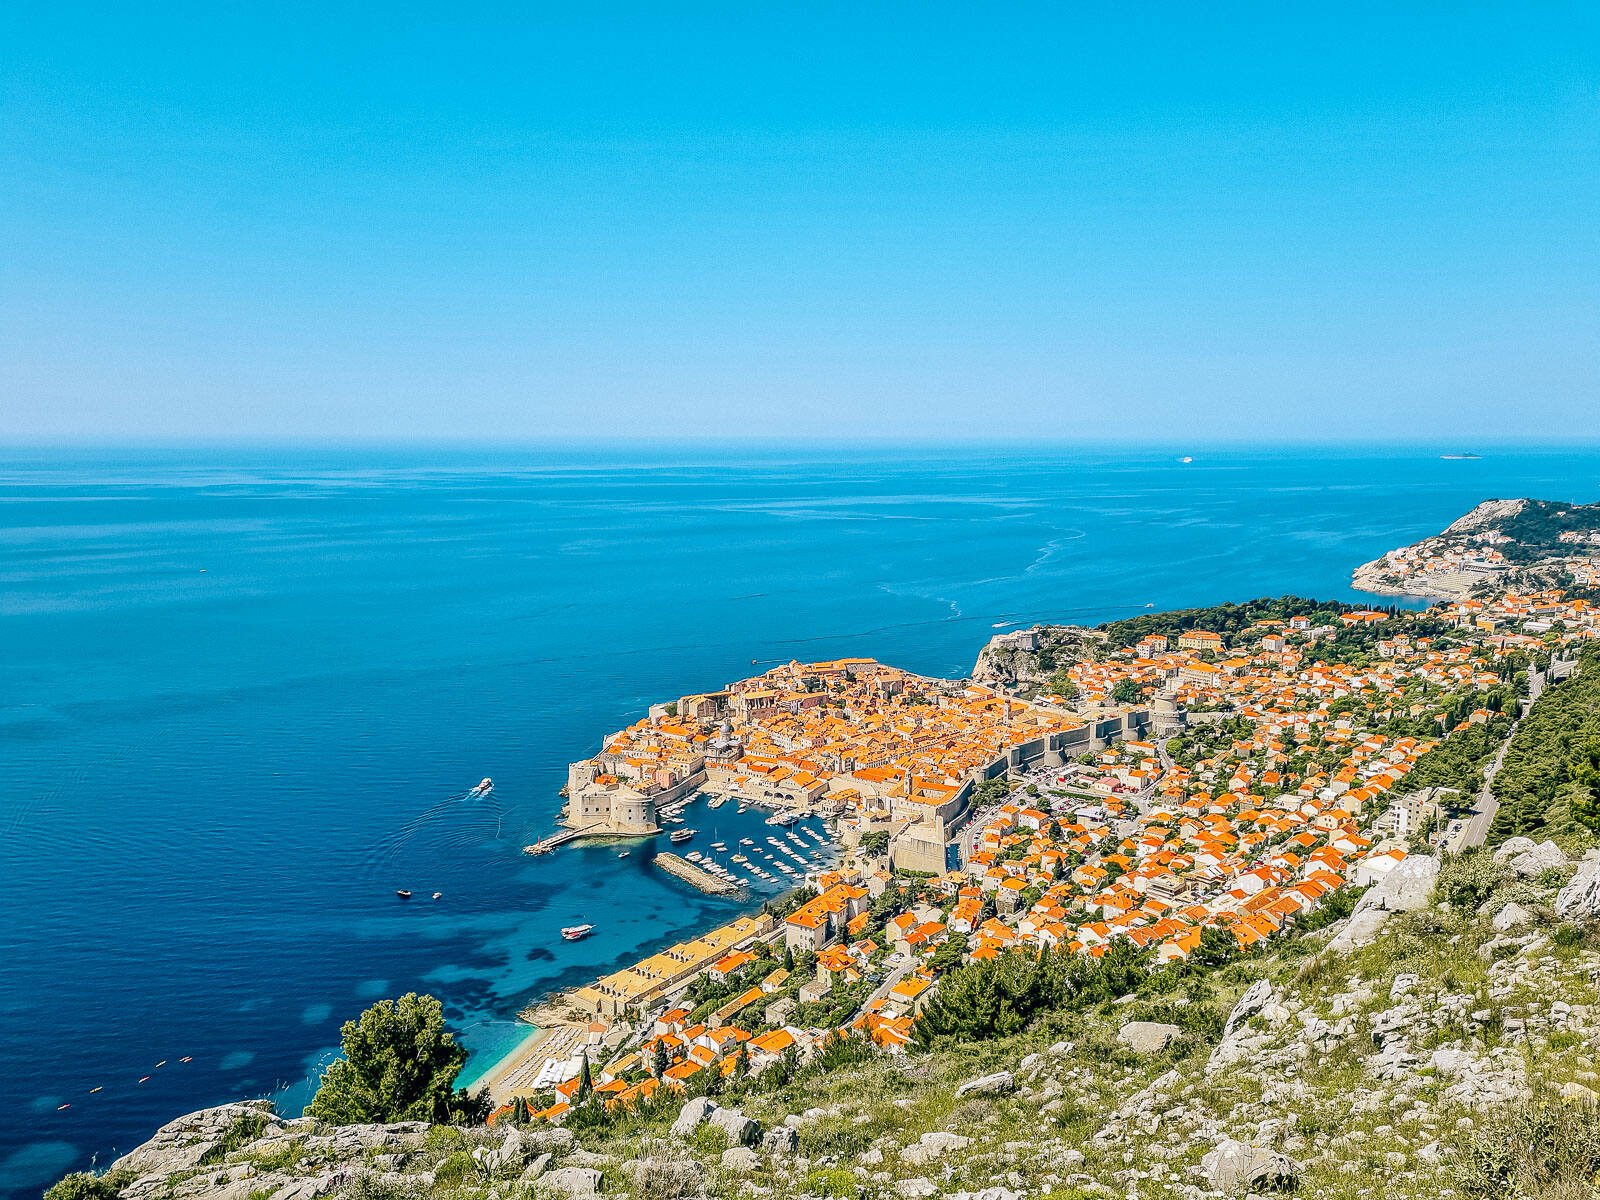 View from a mountain on the coast looking down on Dubrovnik town with orange roofs and a stone city wall around the buildings. The sea and sky are vibrant blue